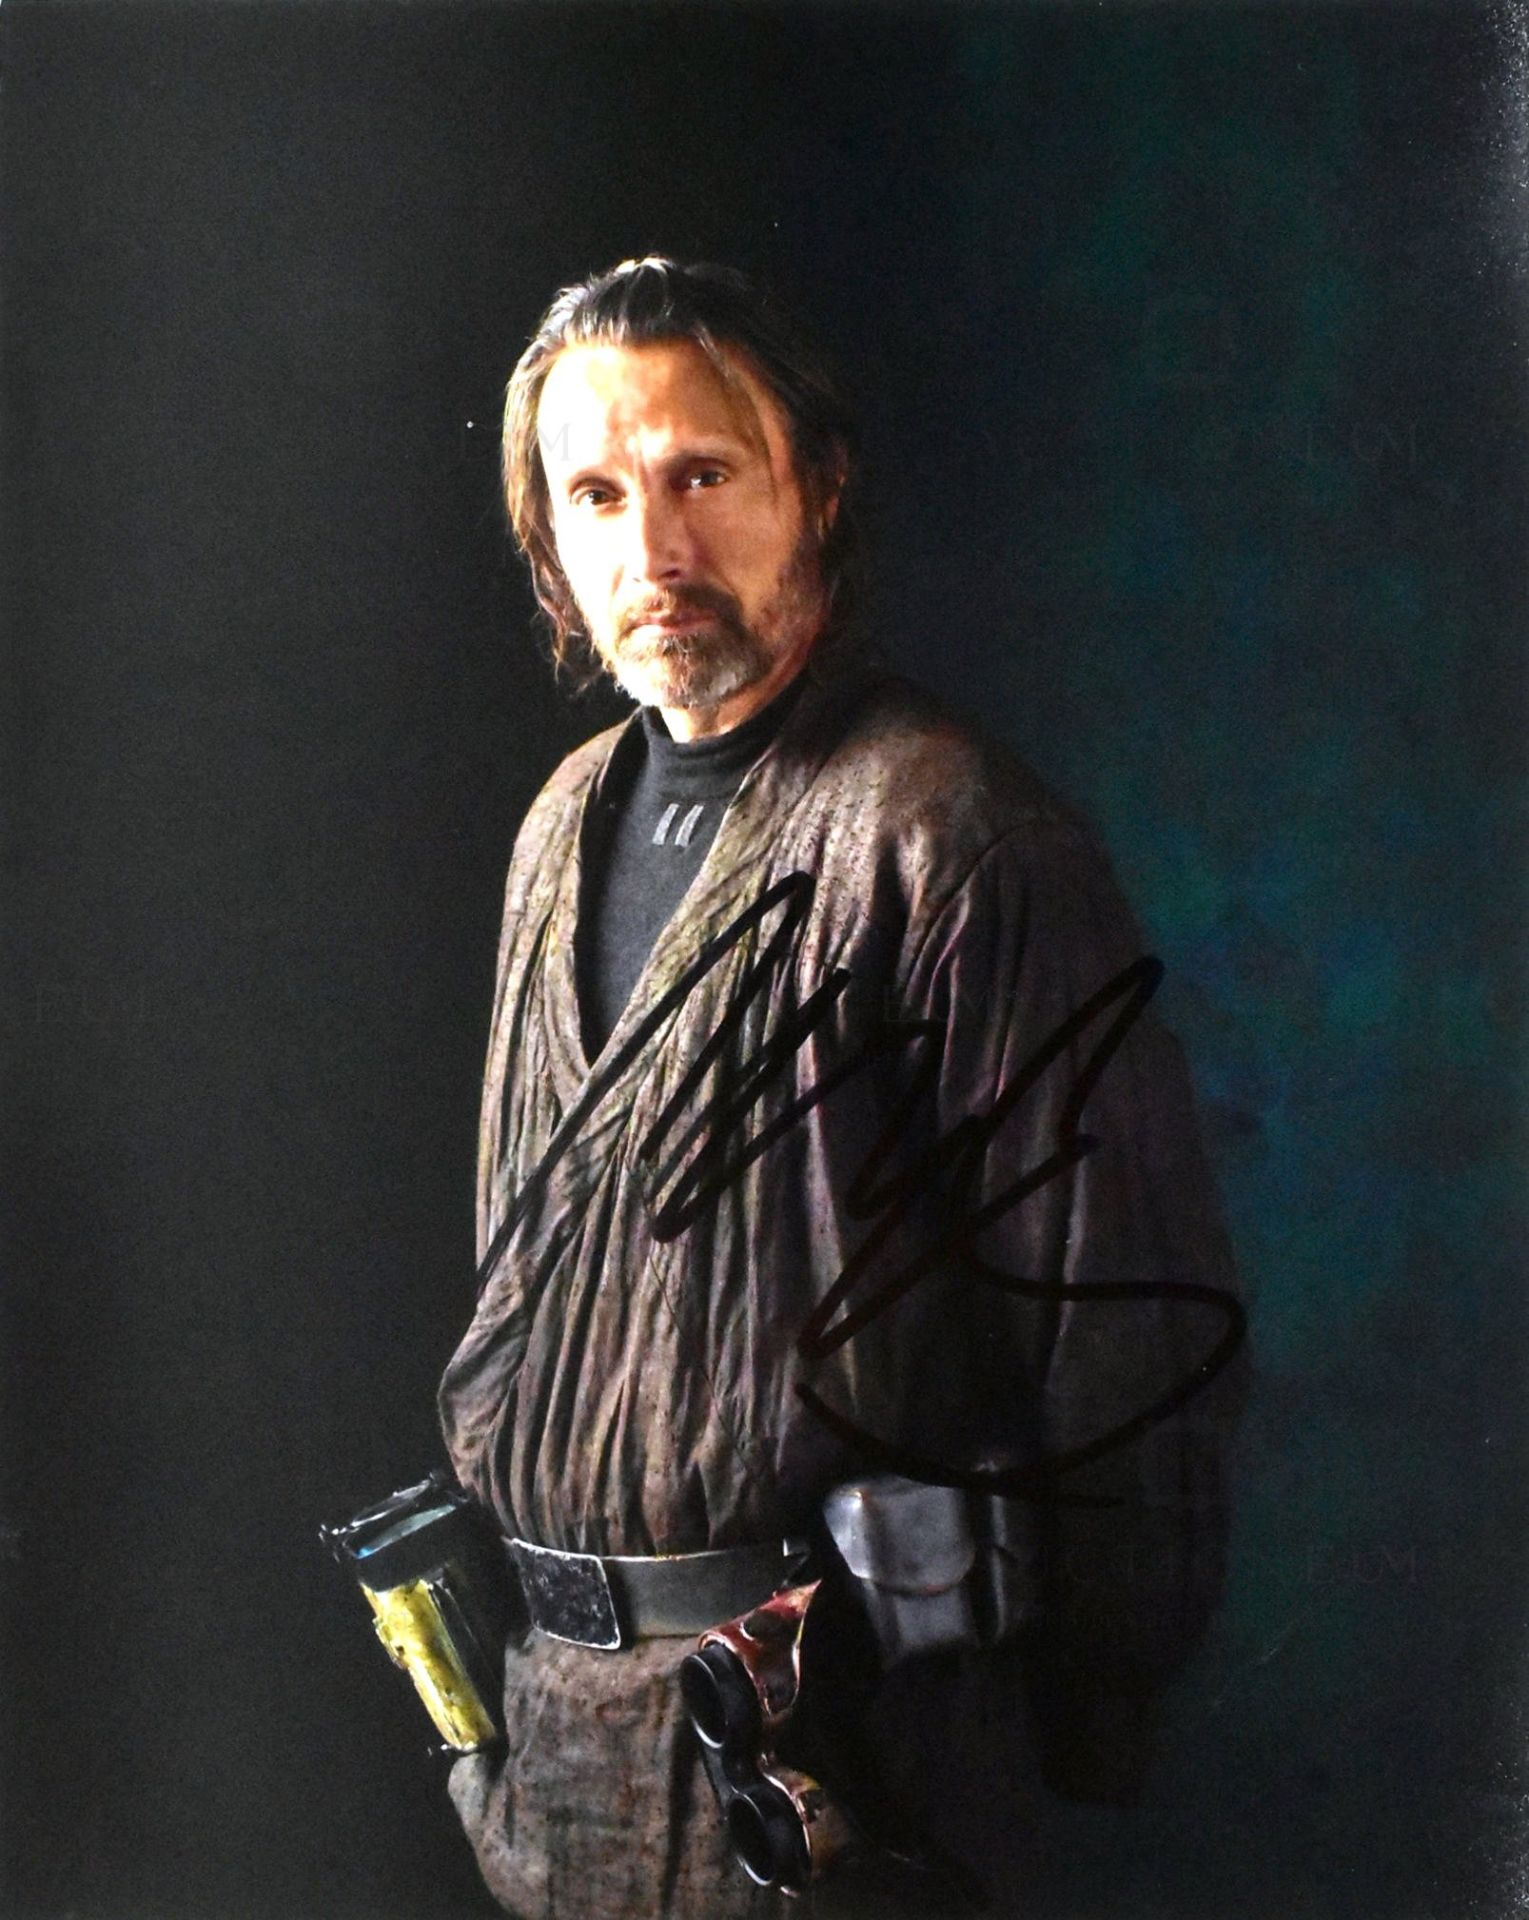 STAR WARS - ROGUE ONE - MADS MIKKELSON SIGNED 8X10" PHOTO - AFTAL